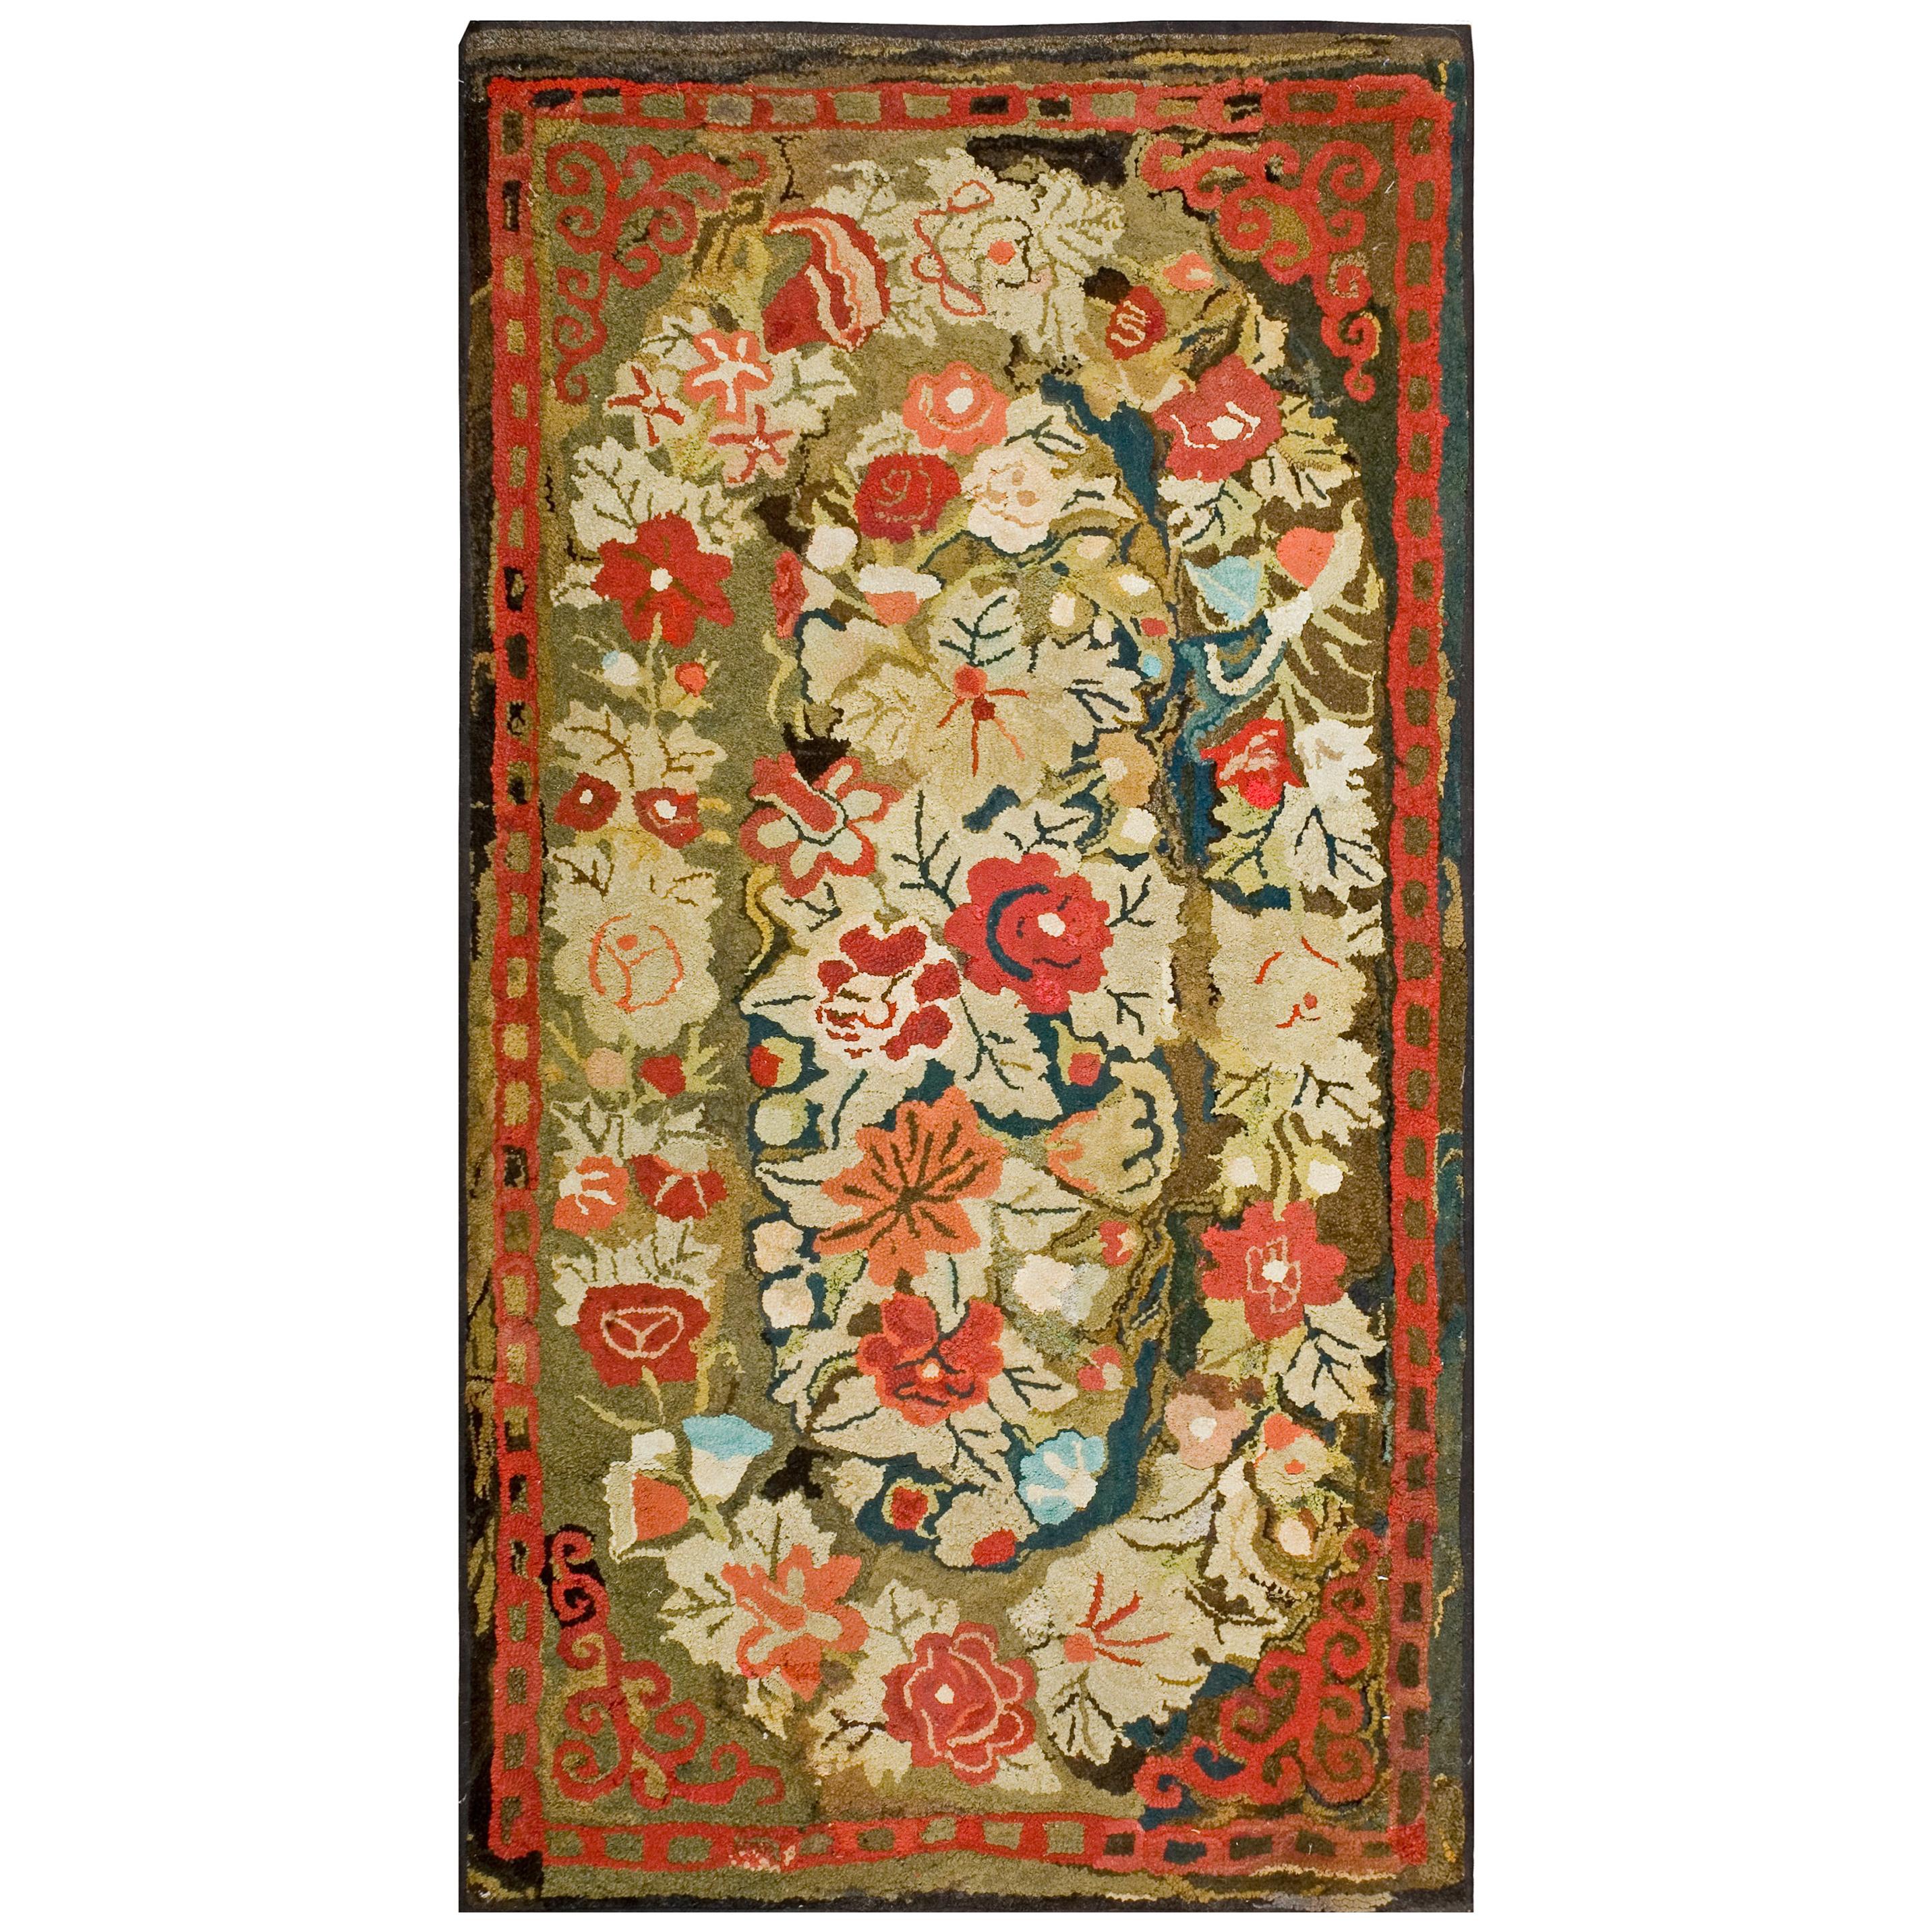 Antique American Hooked Rug 3' 0" x 5' 2" 